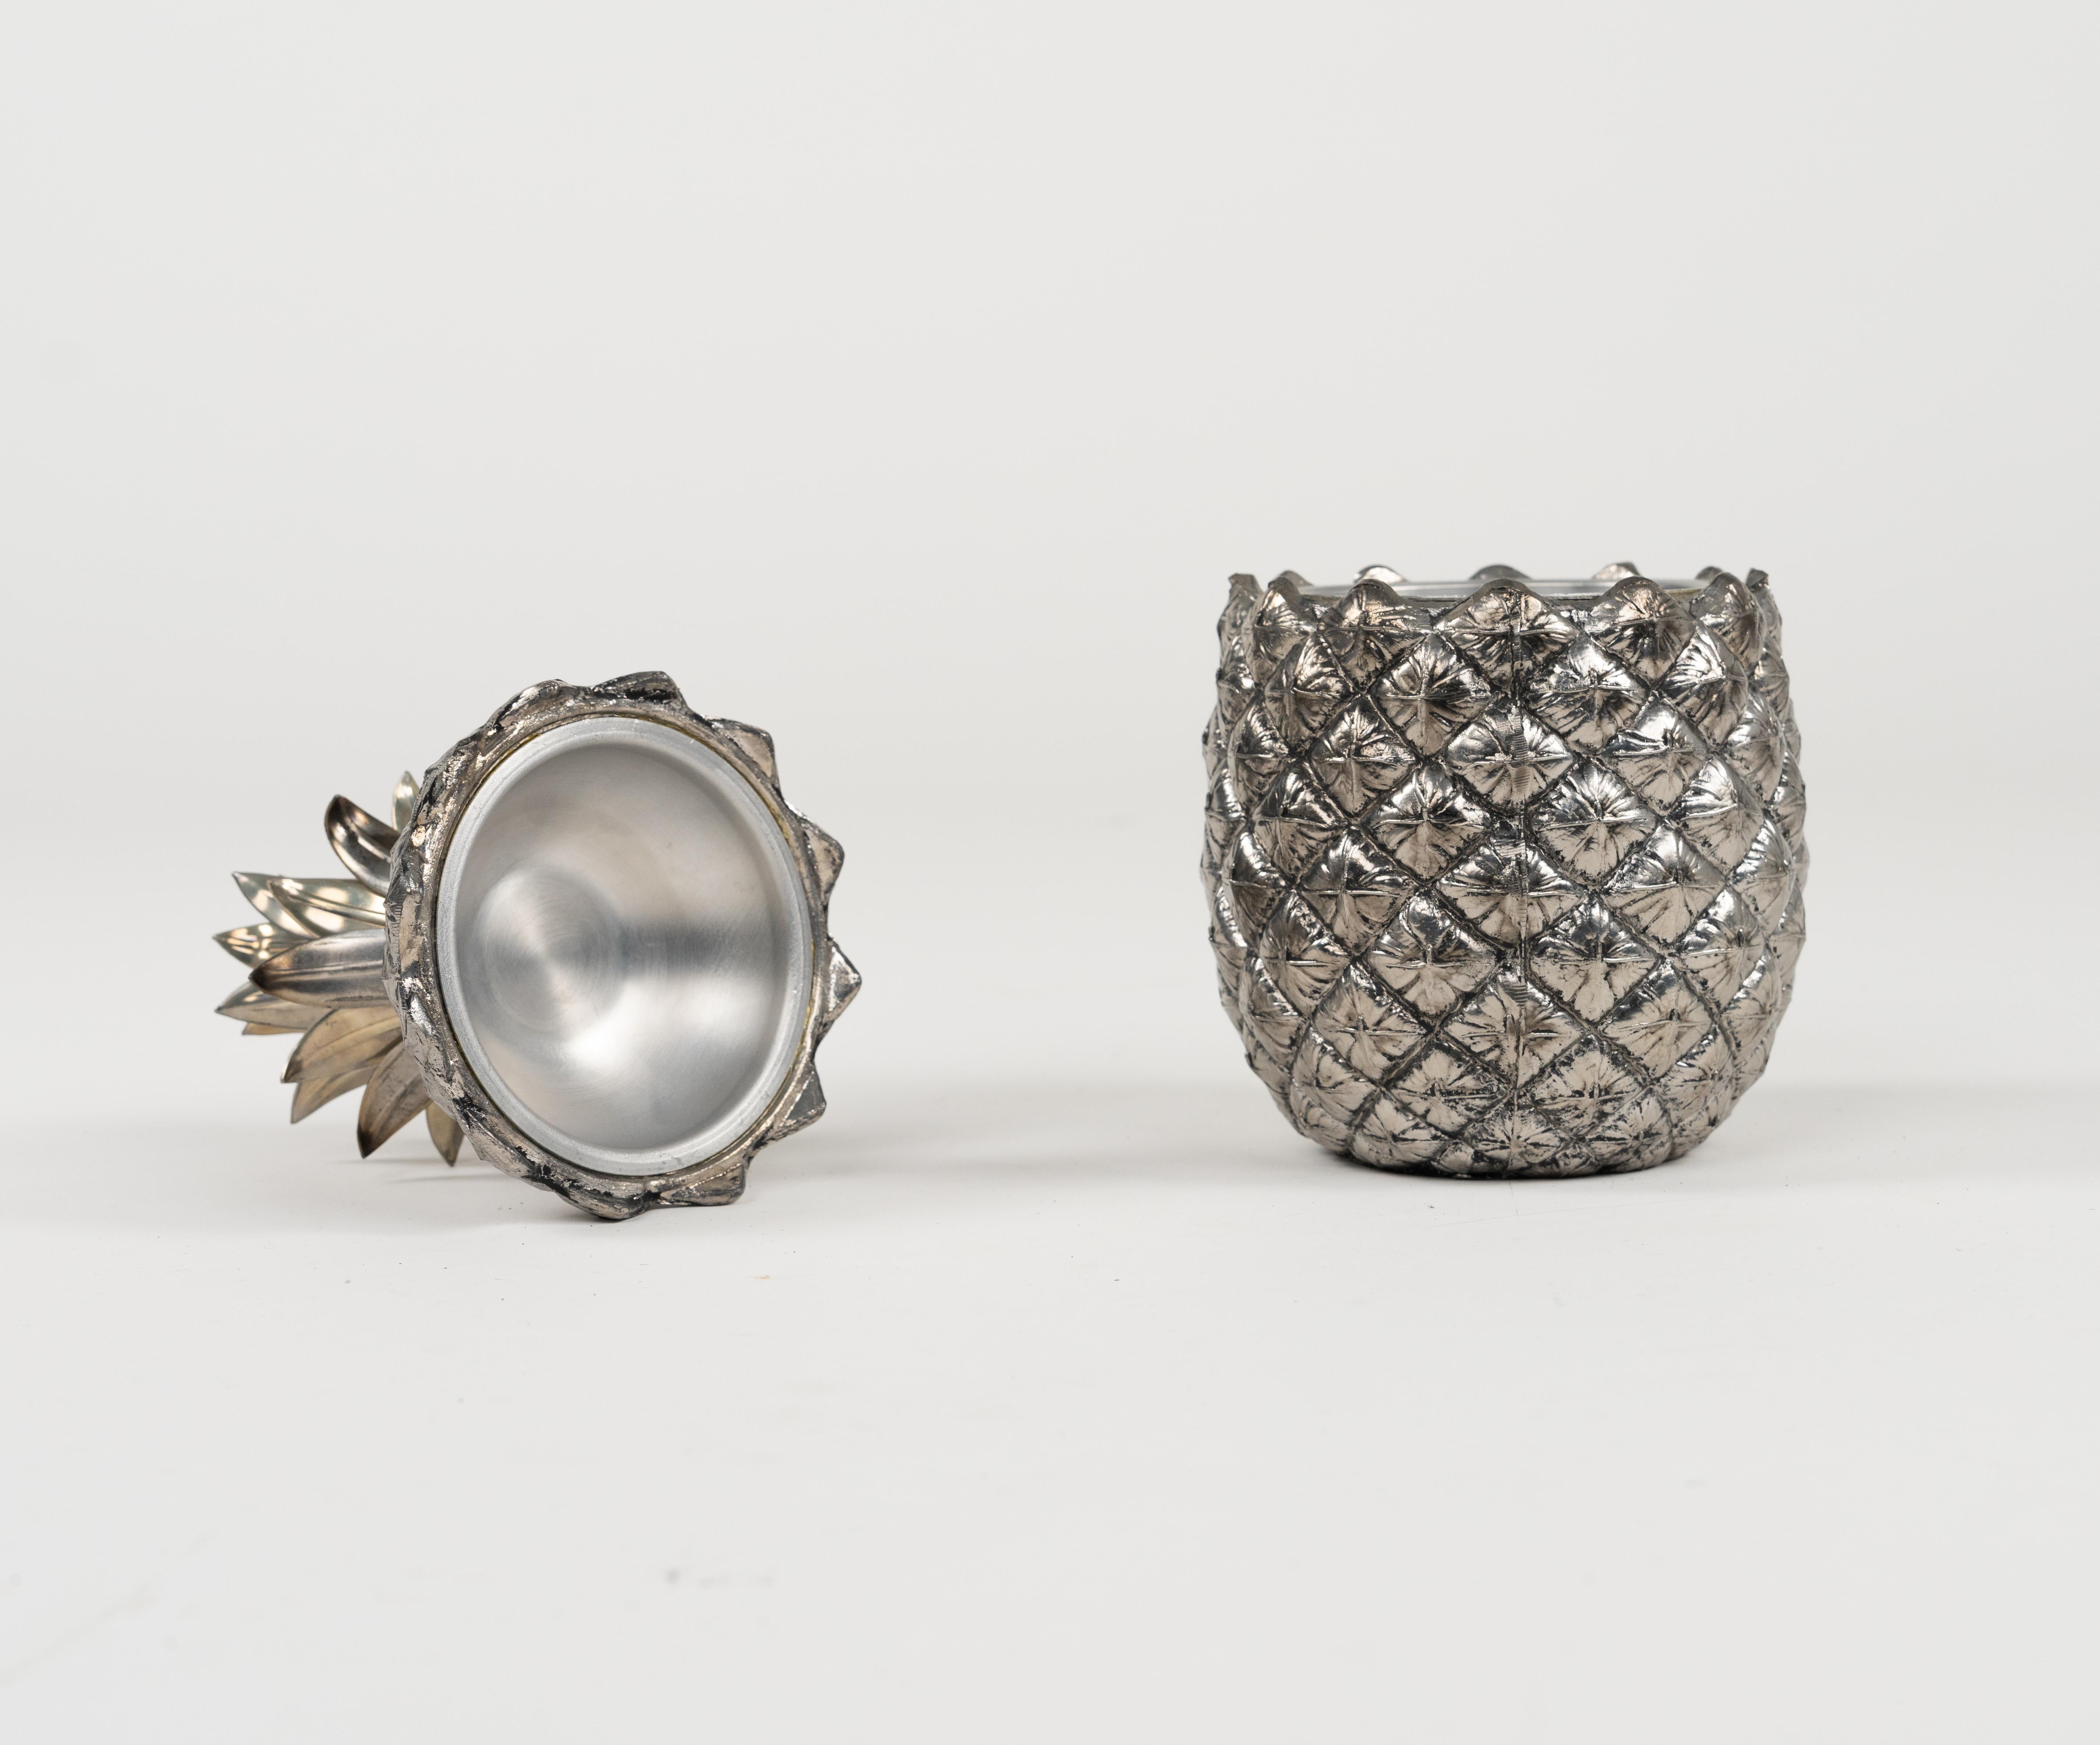 Midcentury Pewter Pineapple Form Ice Bucket by Mauro Manetti Italy, 1960s For Sale 6